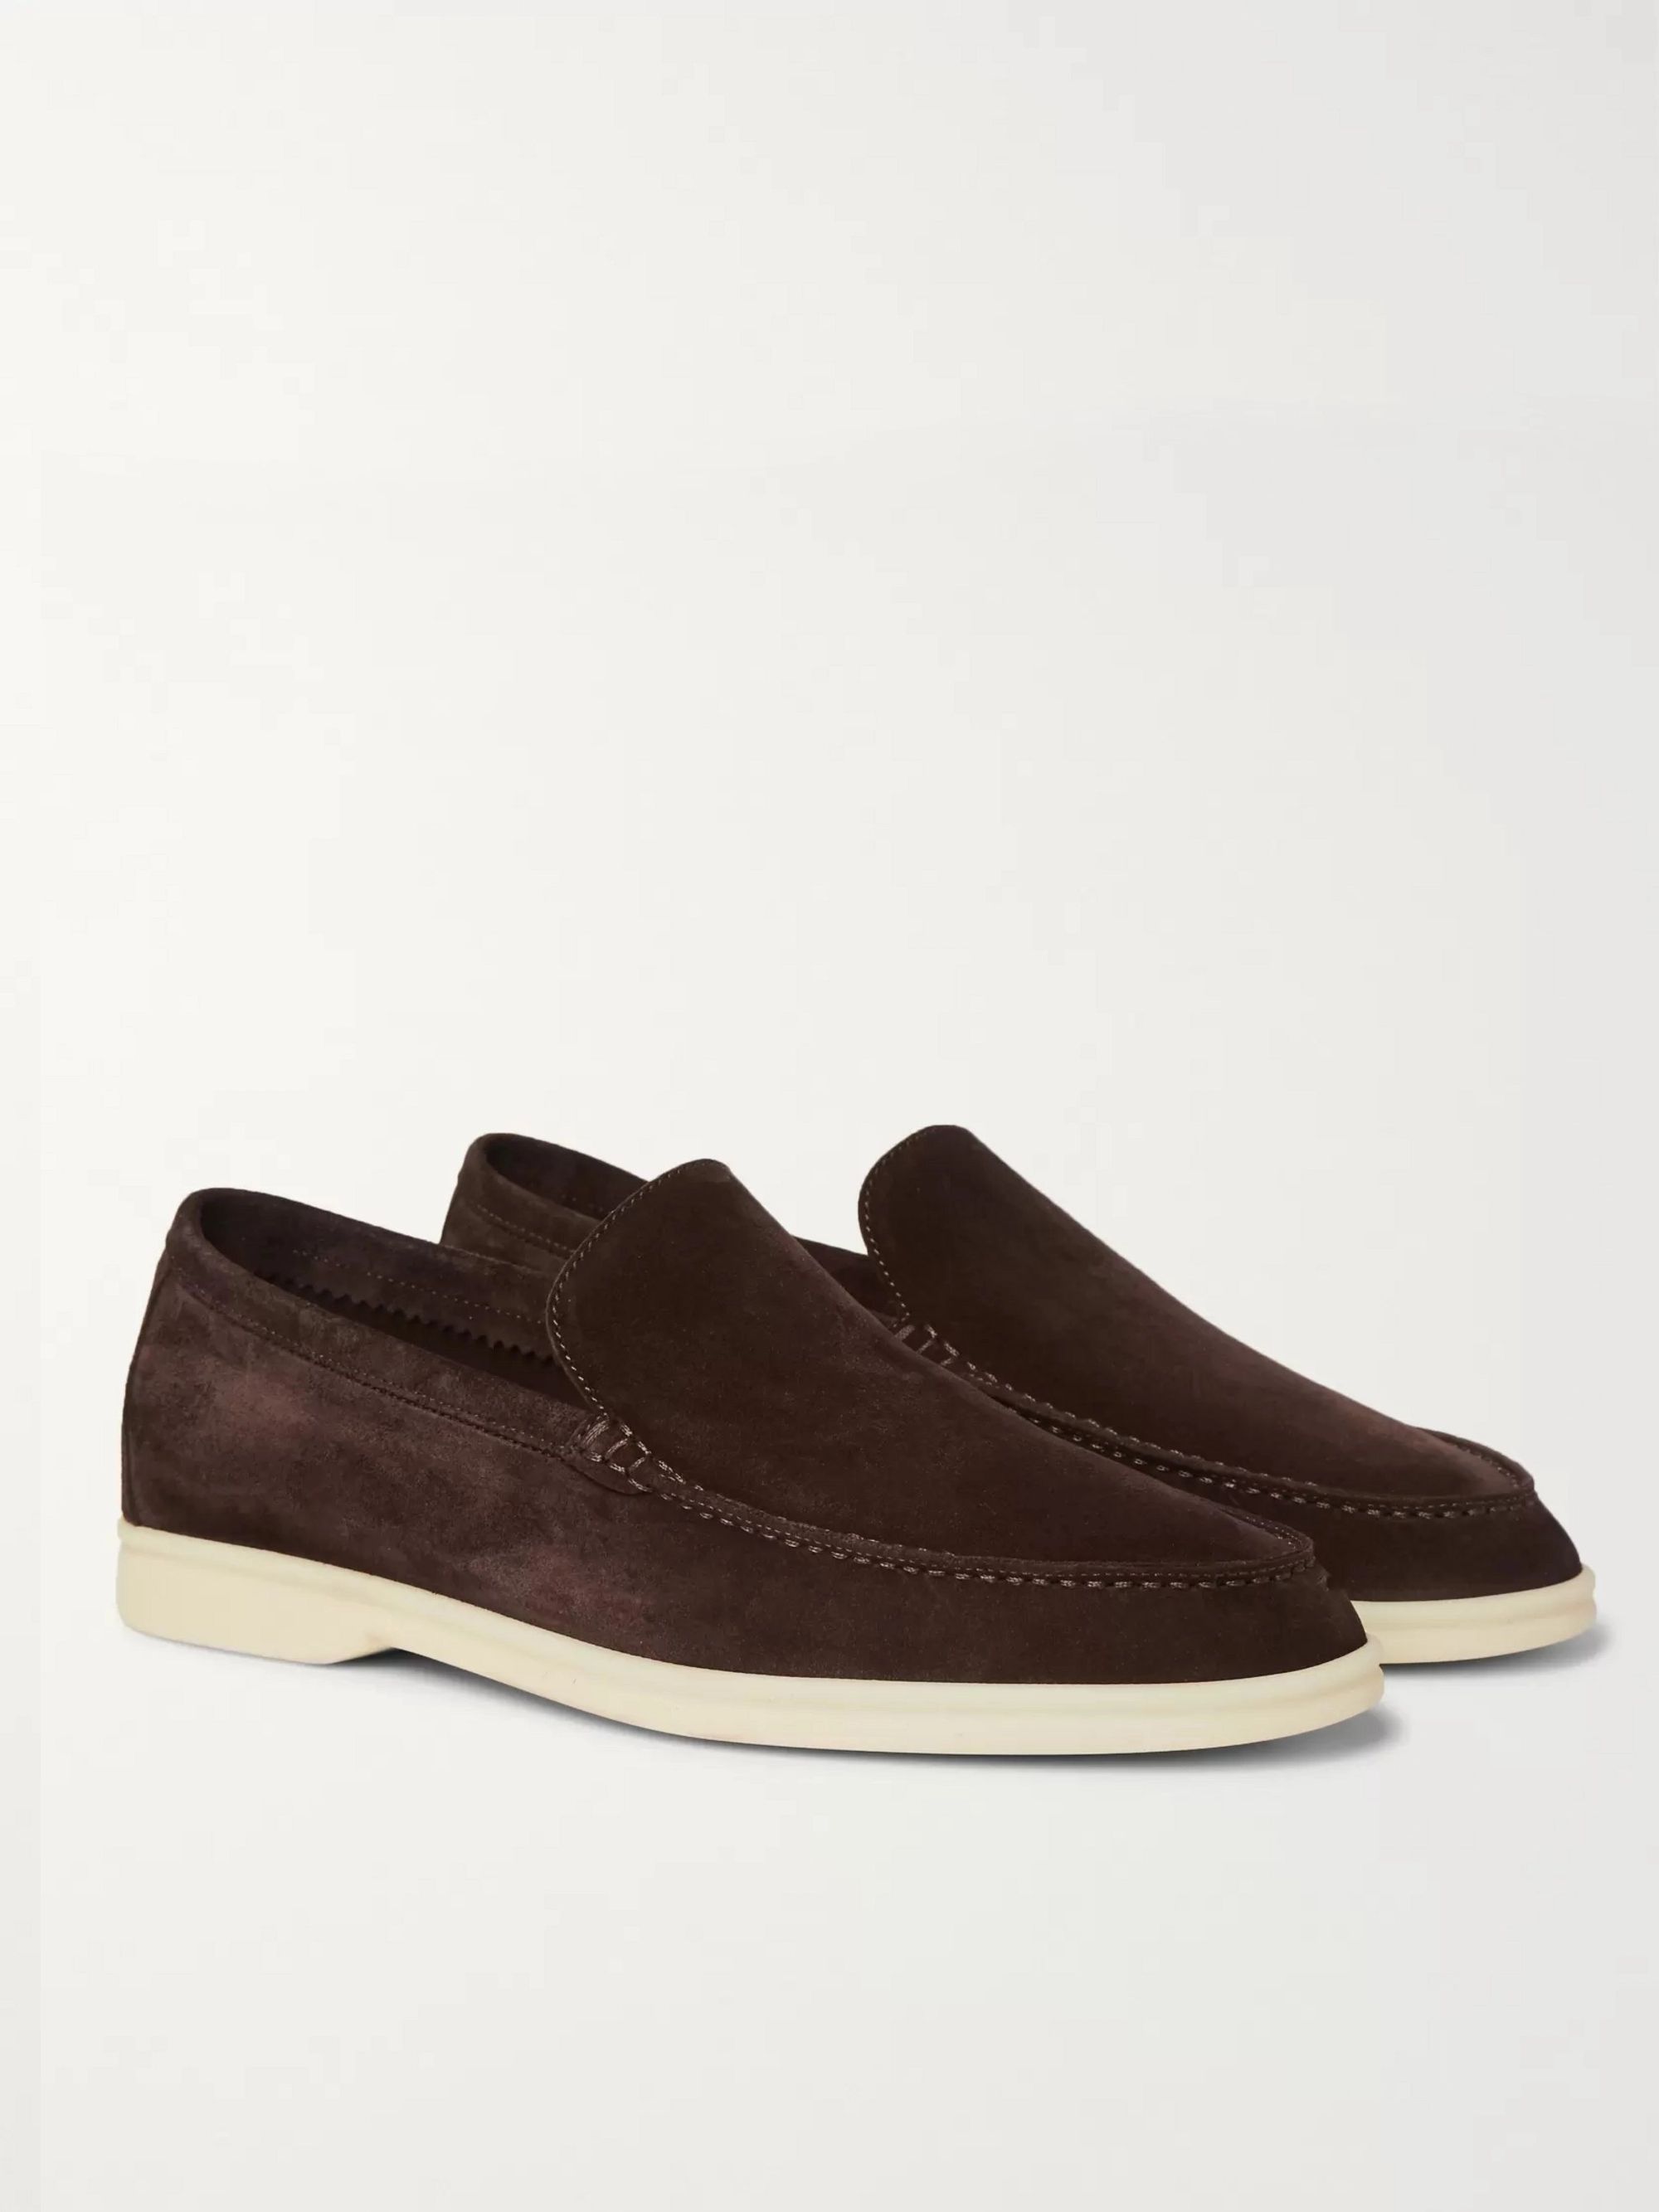 loro piana suede loafers